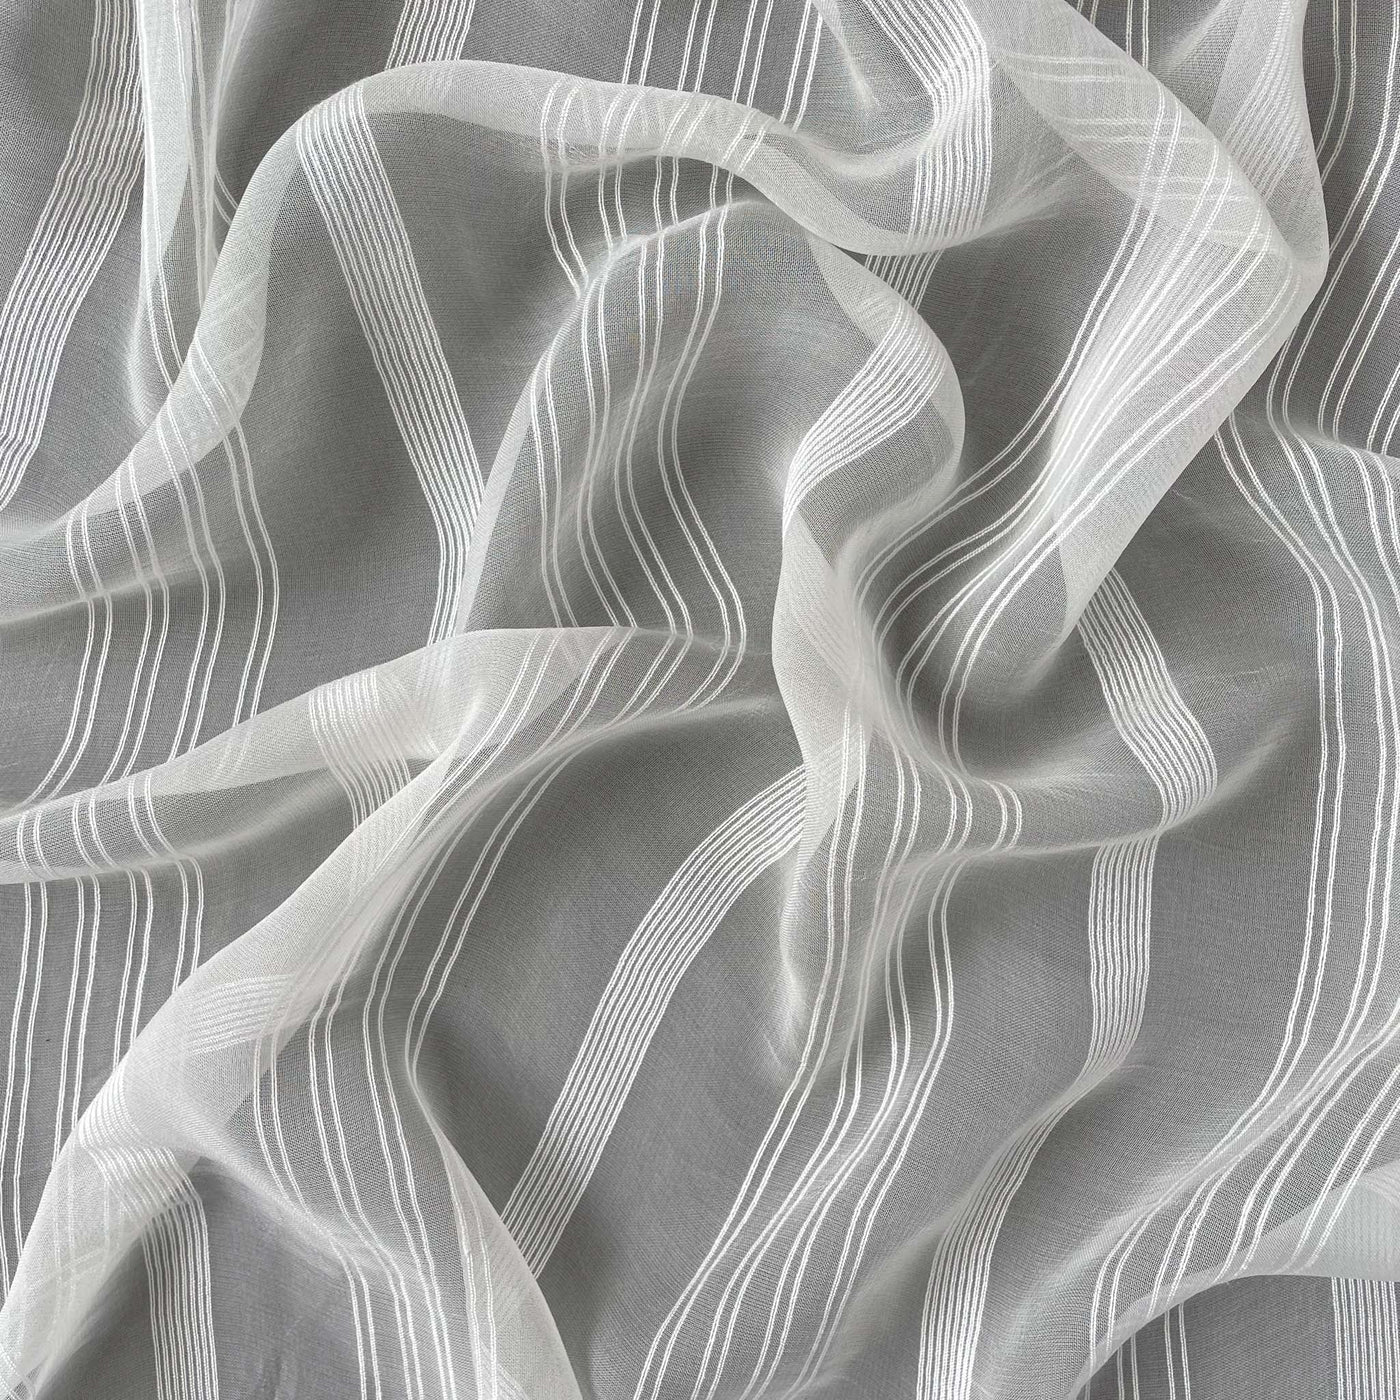 Dyeable Fabric Cut Piece (CUT PIECE) White Dyeable Pure Viscose Georgette Dobby Multi-Stripes Fabric (Width 48 Inches)